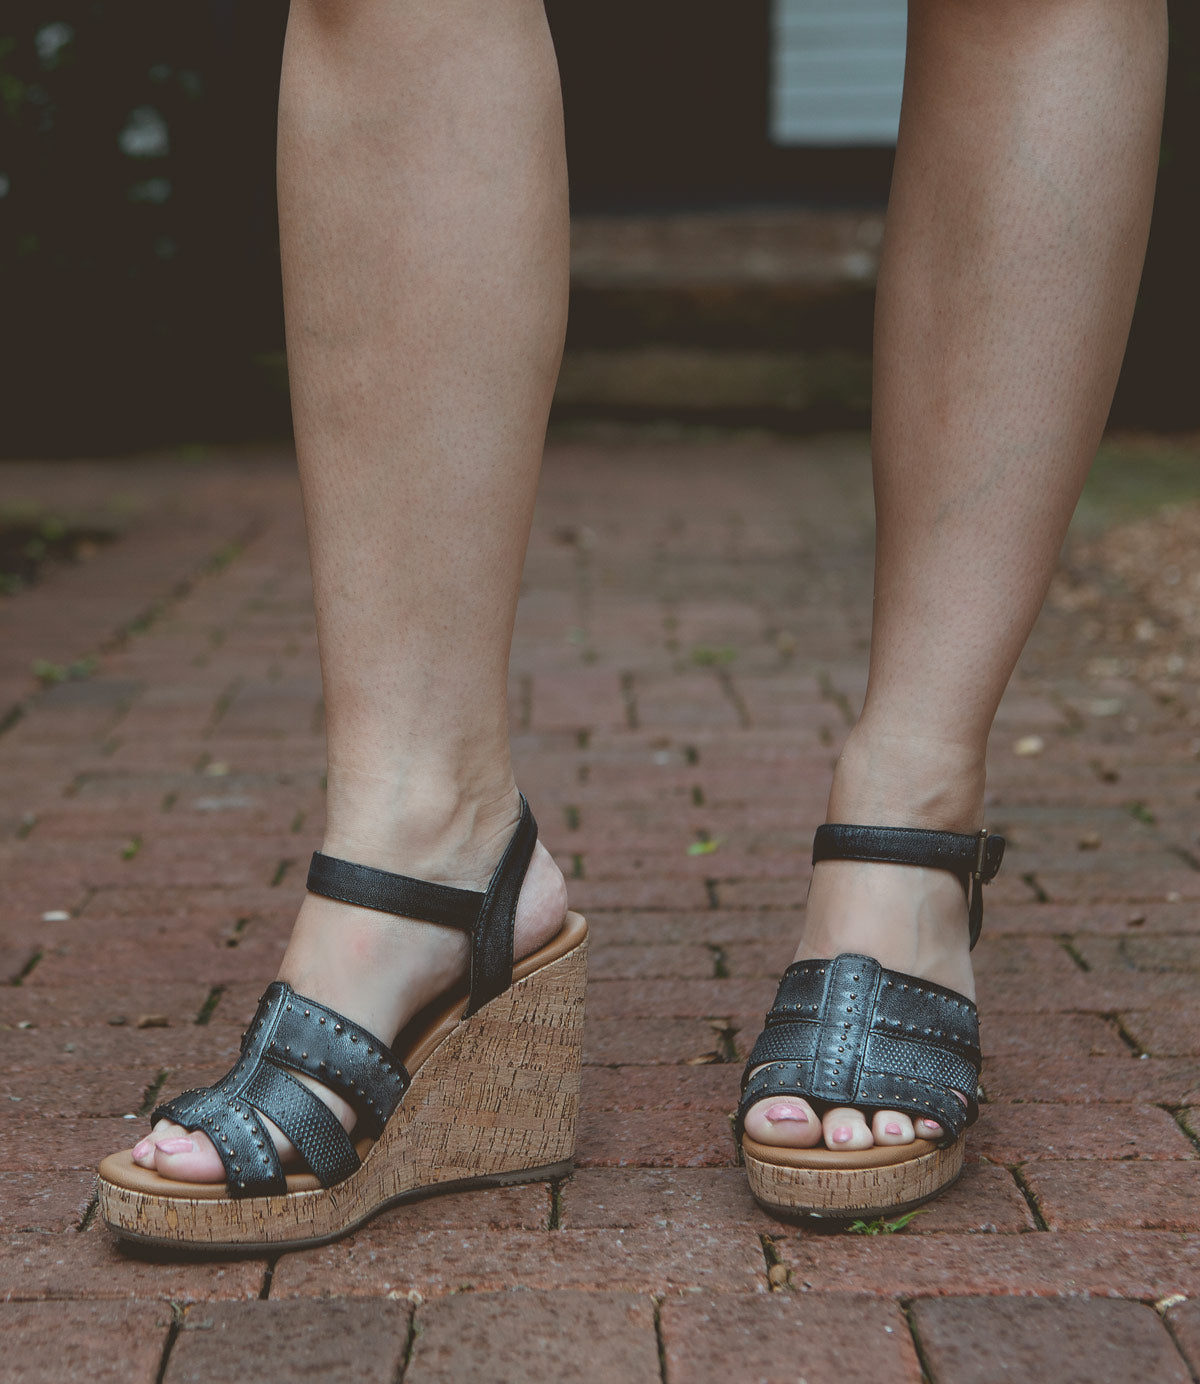 A person wearing Roan Different black, strappy wedge sandals with a leather footbed and wooden platform heels stands on a brick pavement.